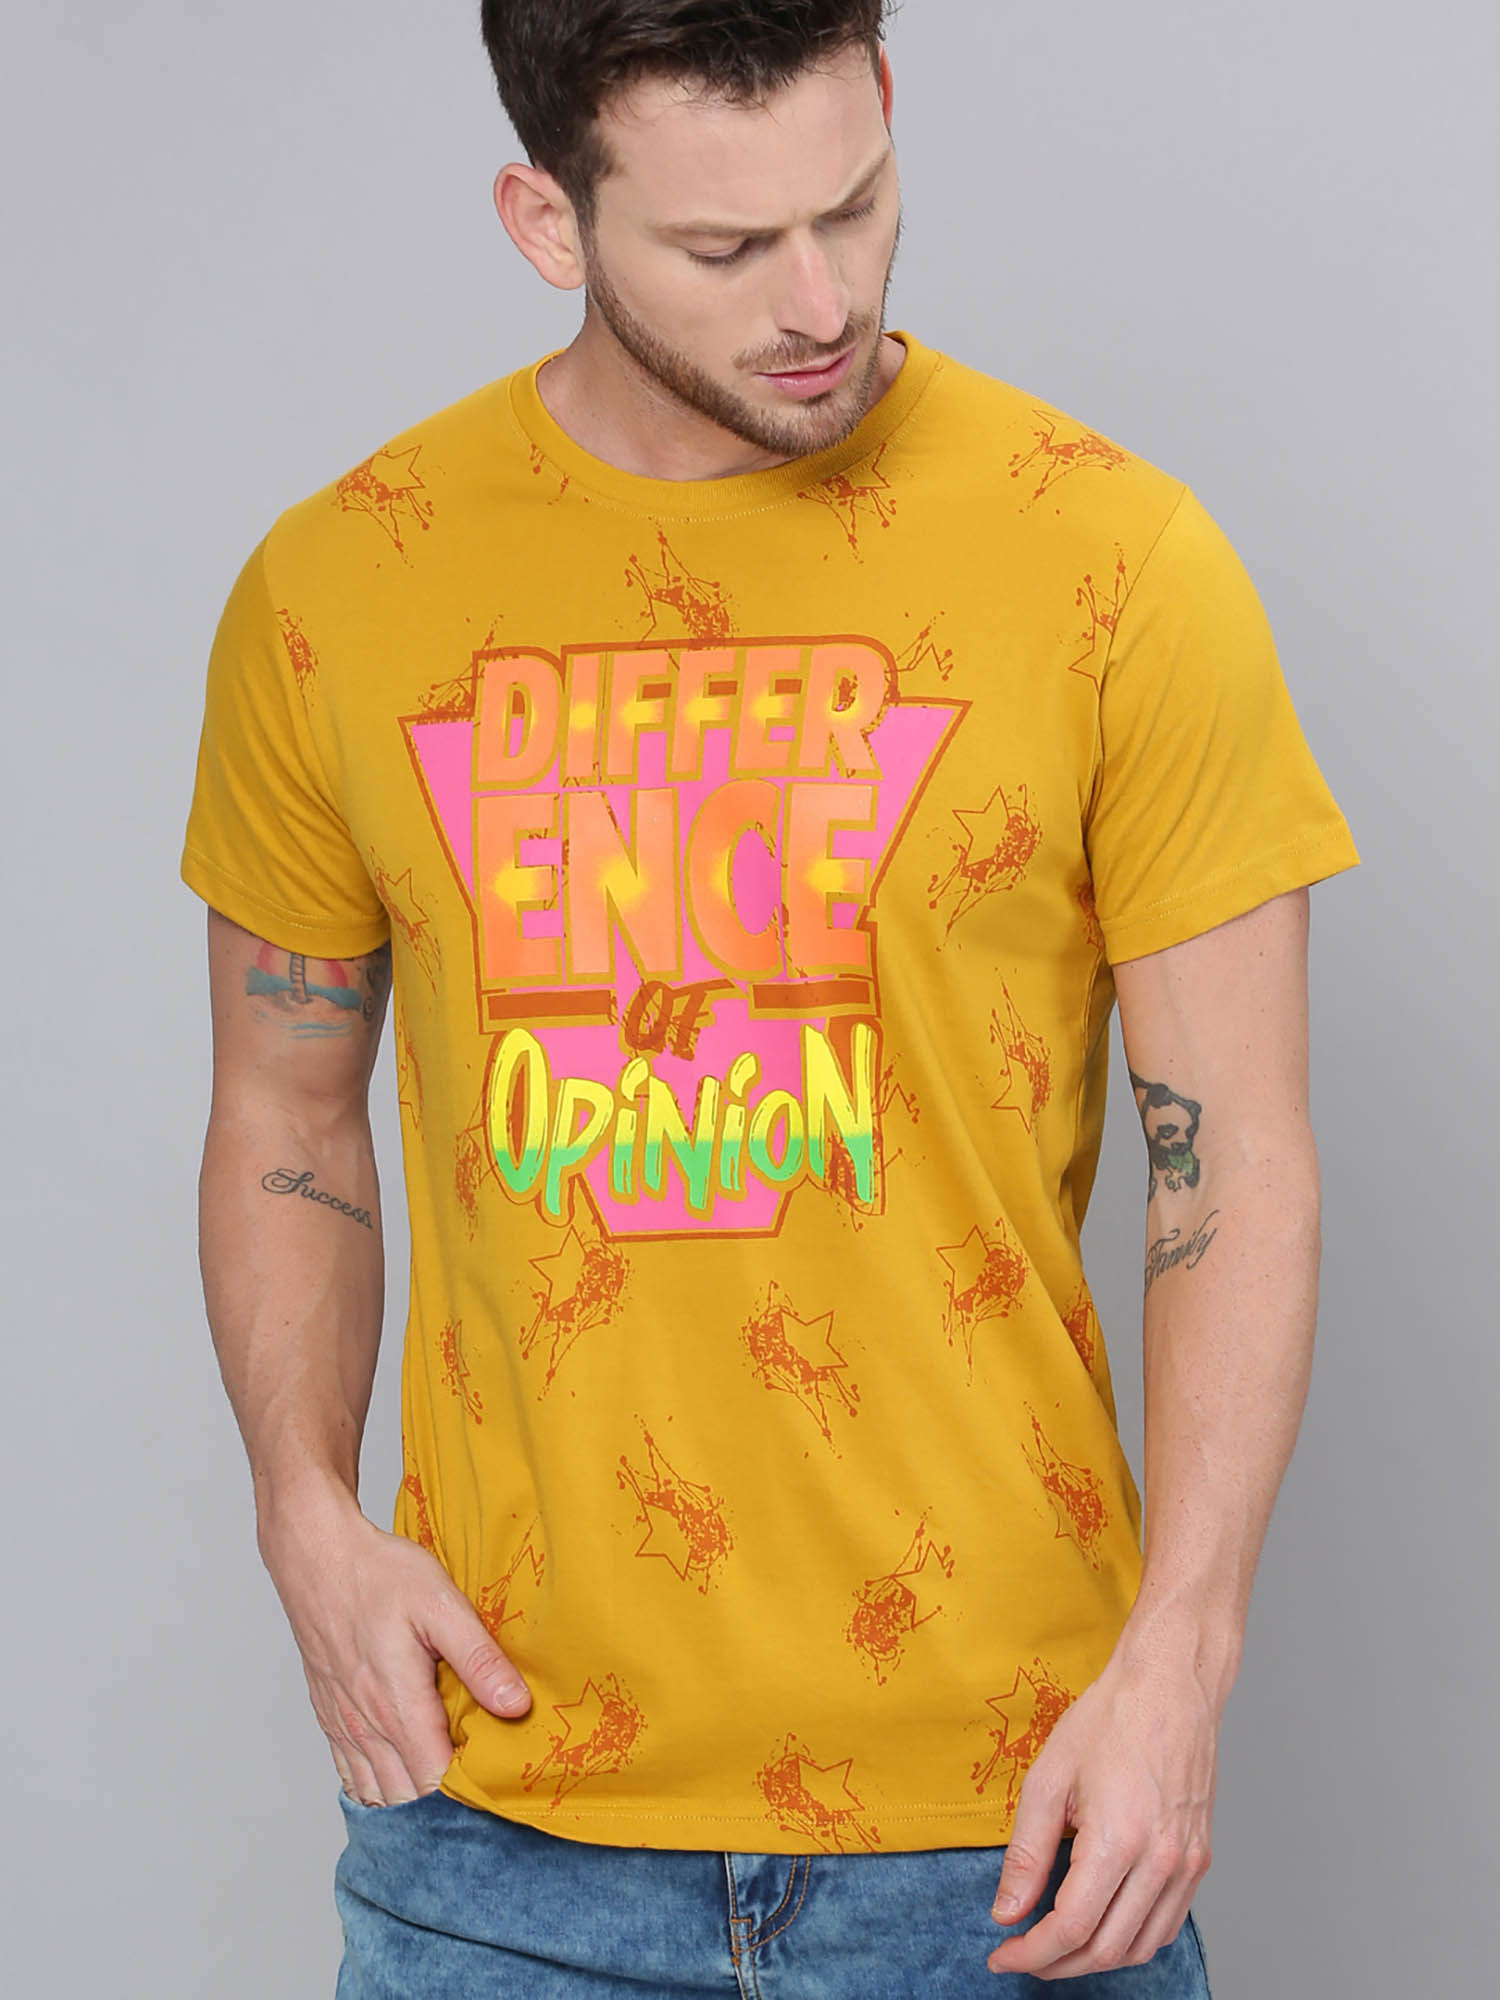 Difference of Opinion Printed T-Shirt (L)